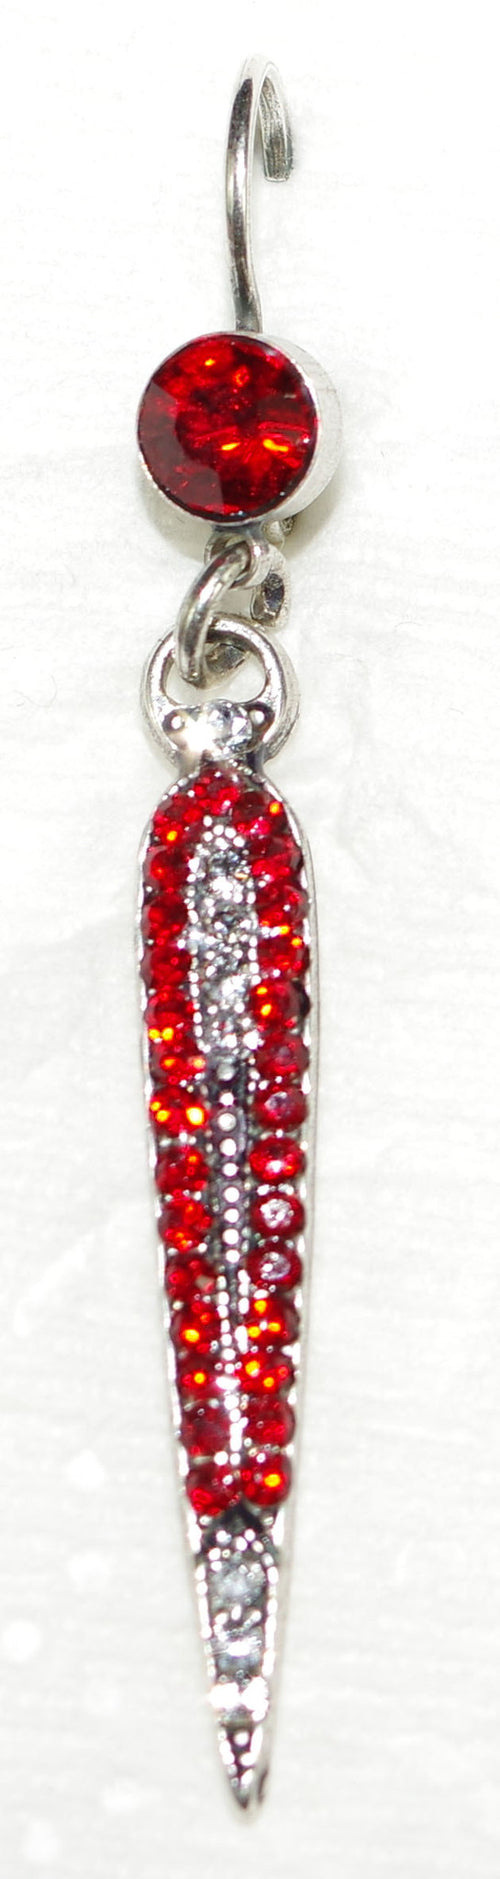 MARIANA EARRINGS SIAM: clear, red stones in 1.75" silver rhodium setting, lever backs